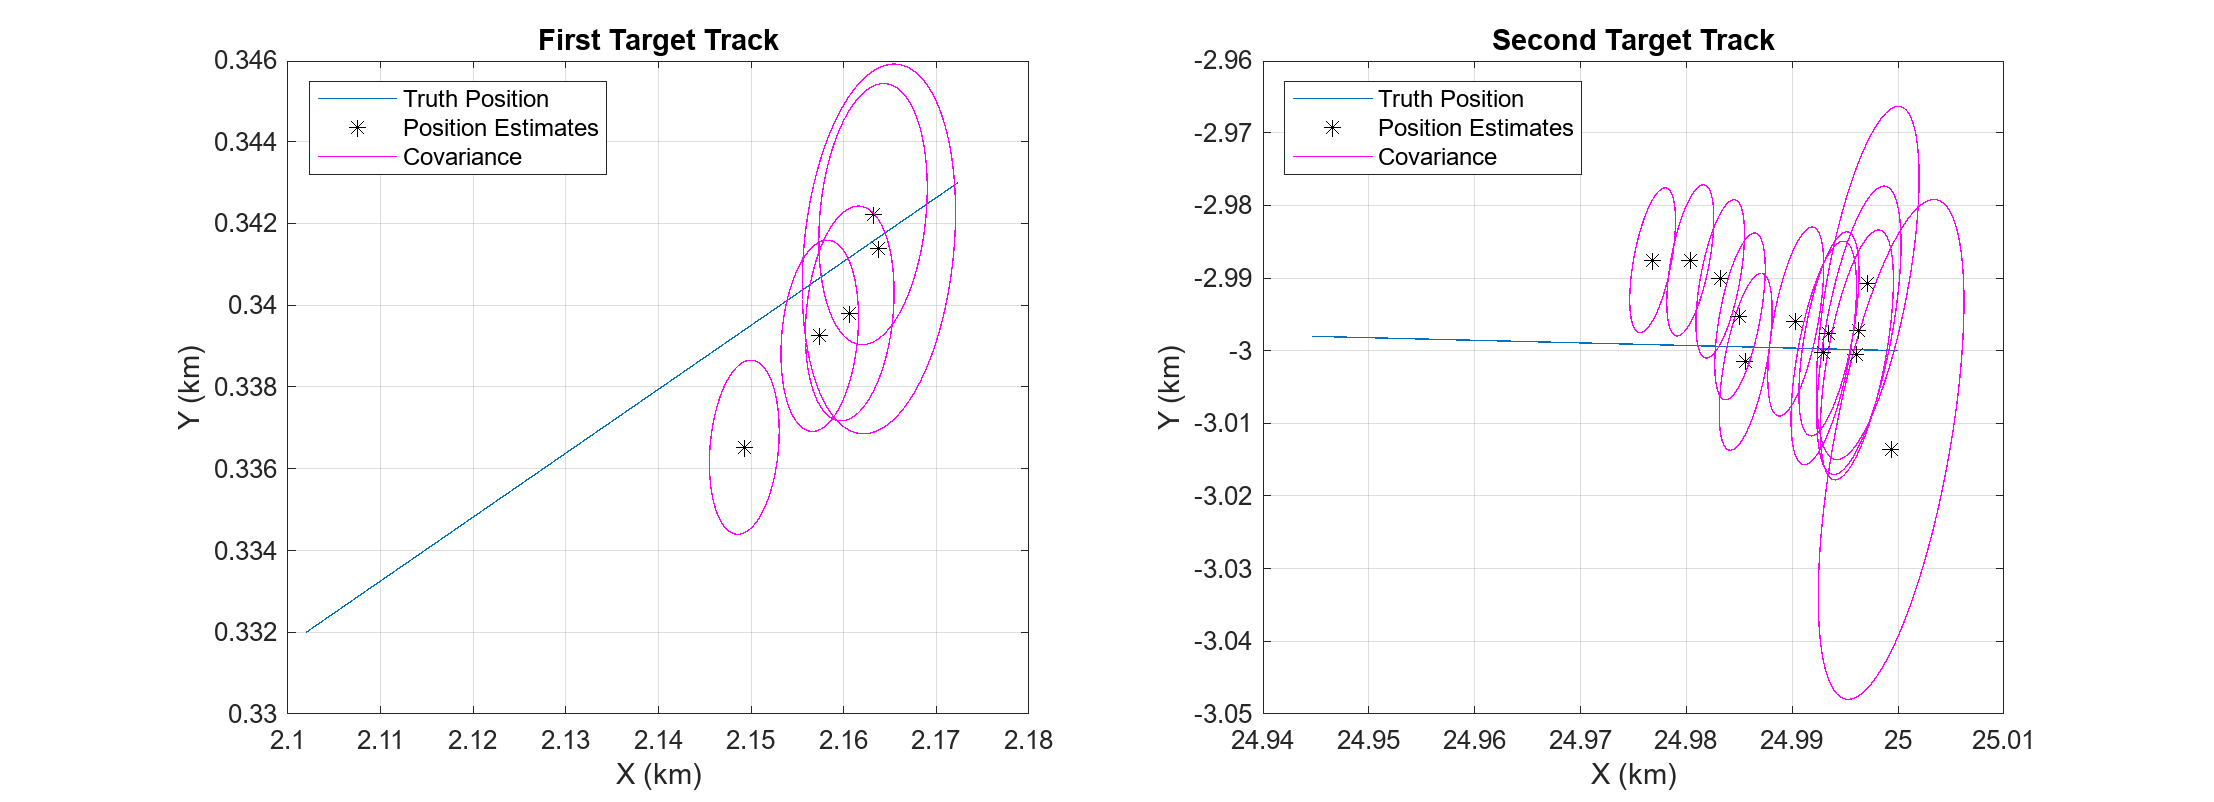 Figure contains 2 axes objects. Axes object 1 with title First Target Track, xlabel X (km), ylabel Y (km) contains 11 objects of type line. One or more of the lines displays its values using only markers These objects represent Truth Position, Position Estimates, Covariance. Axes object 2 with title Second Target Track, xlabel X (km), ylabel Y (km) contains 25 objects of type line. One or more of the lines displays its values using only markers These objects represent Truth Position, Position Estimates, Covariance.